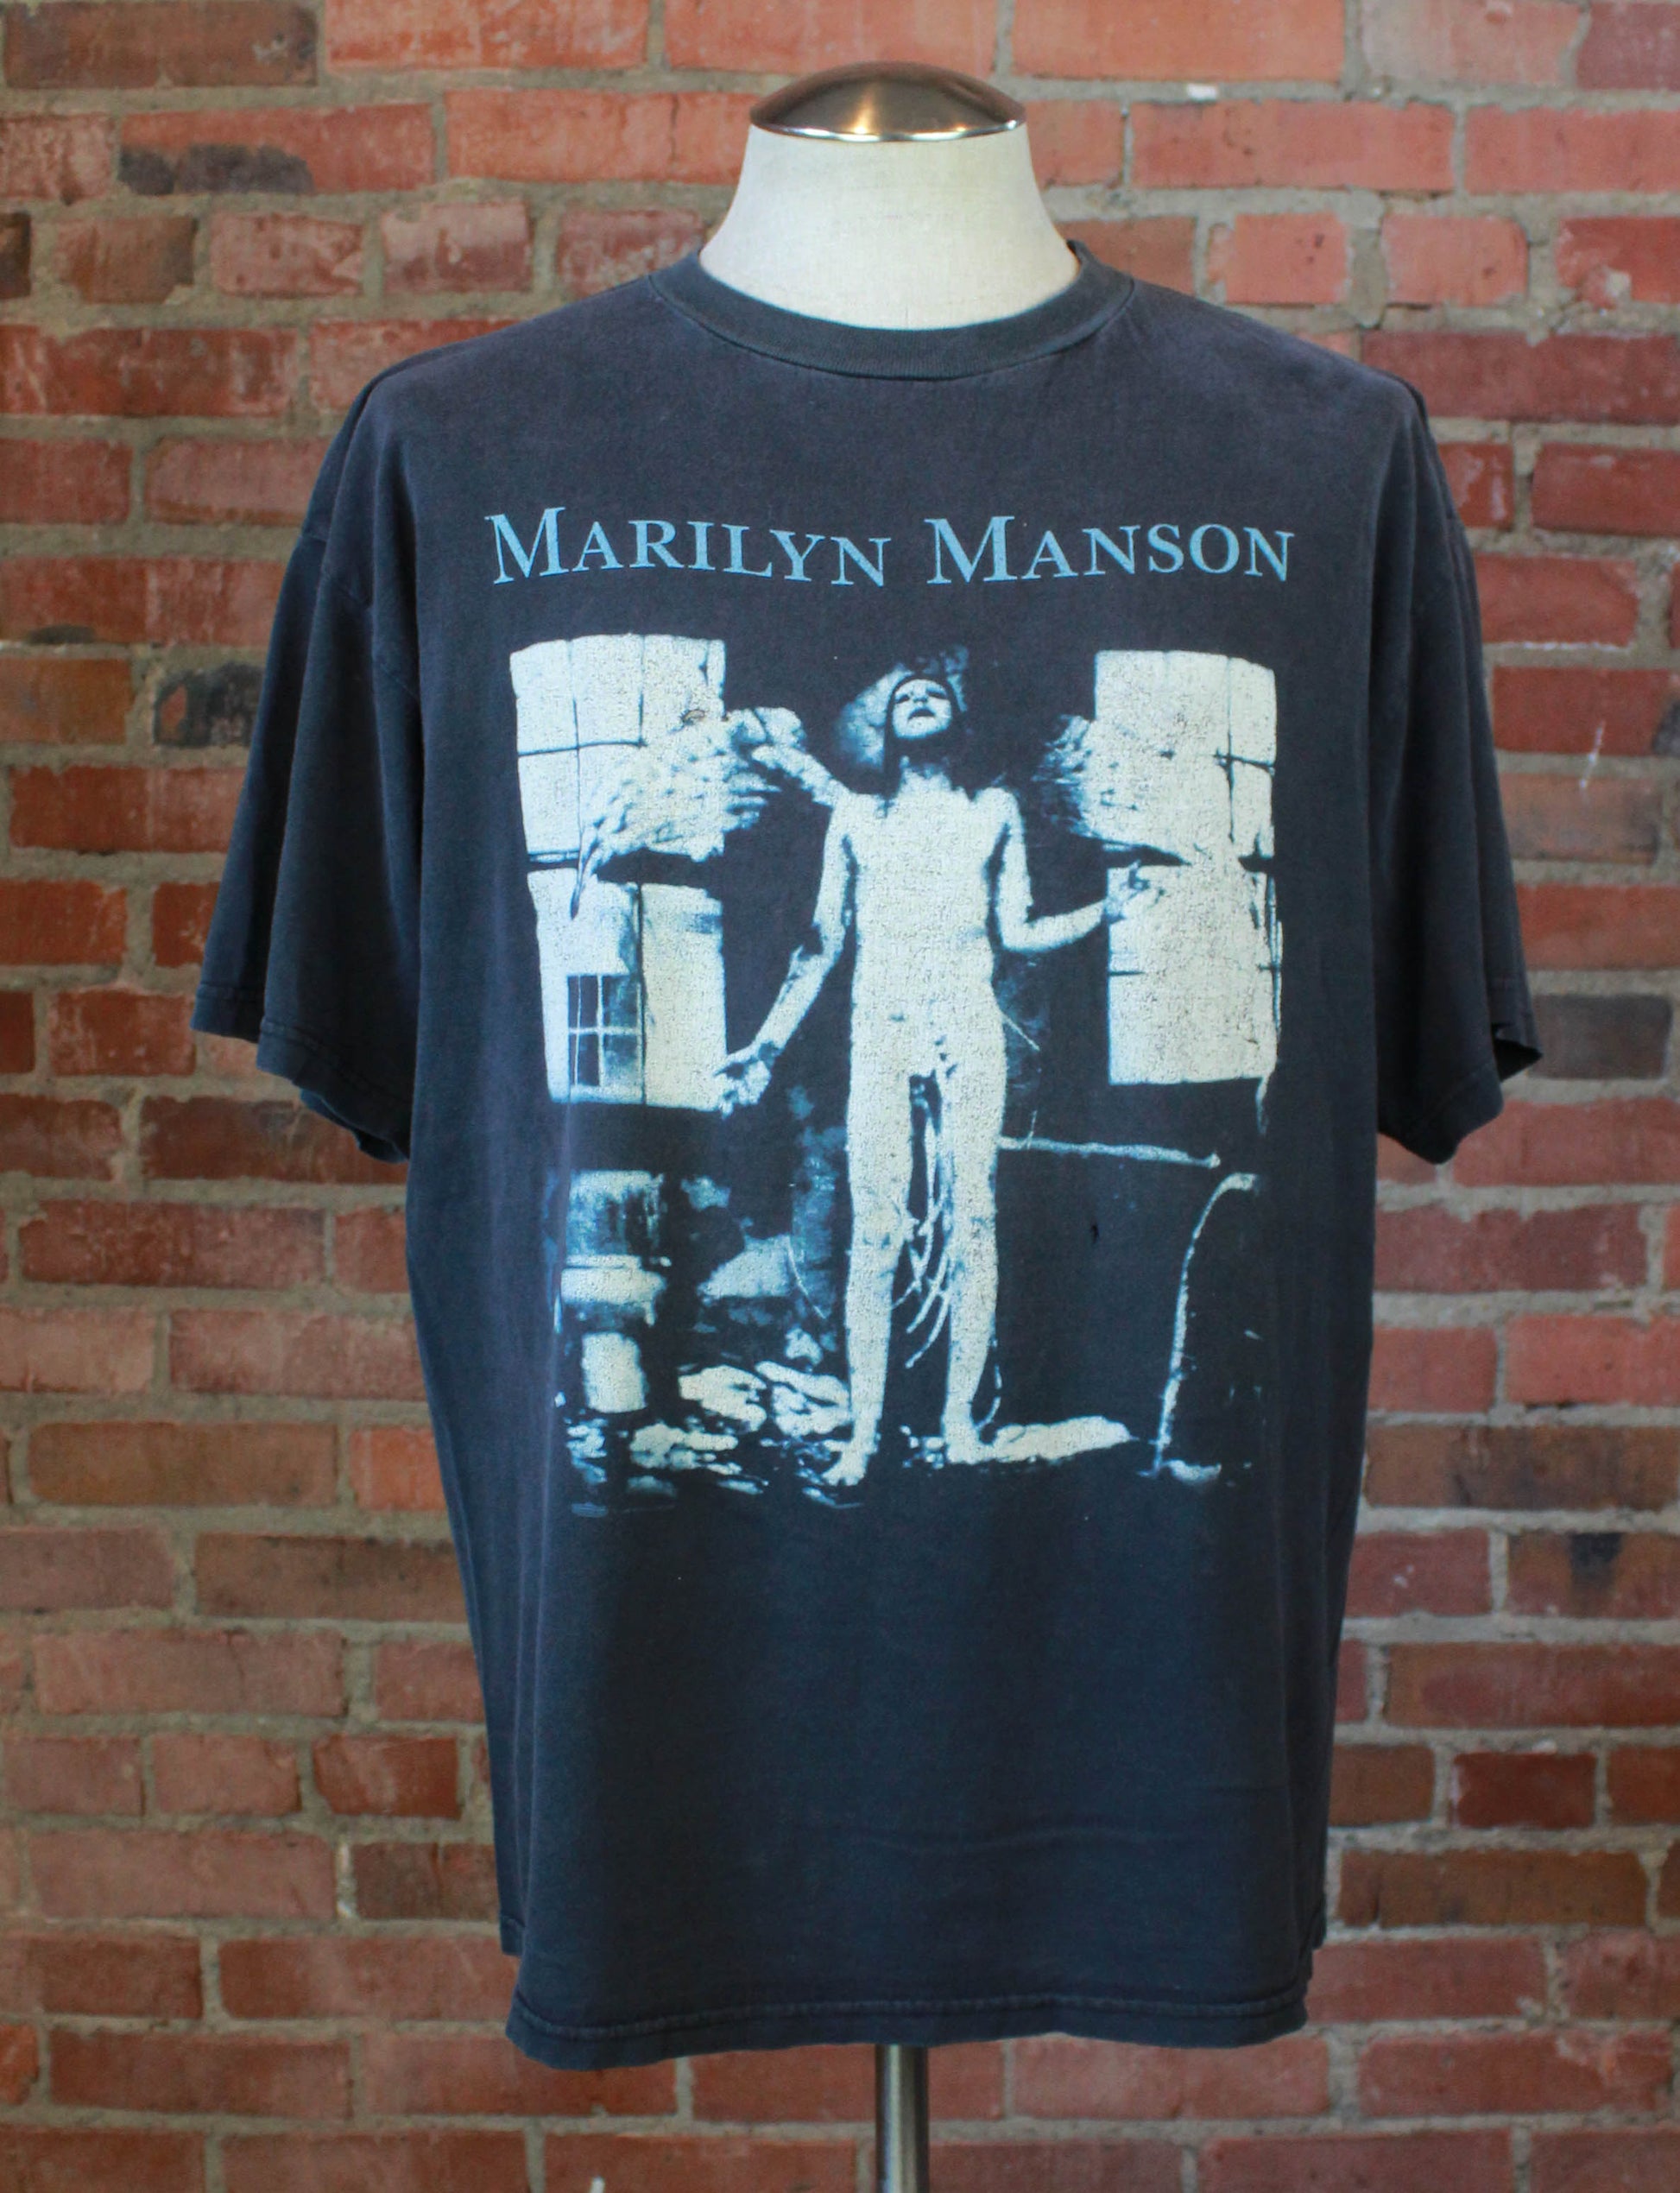 Vintage 1996 Marilyn Manson Concert T Shirt All F***ed Up Dead To The World Black Unisex XL/XXL